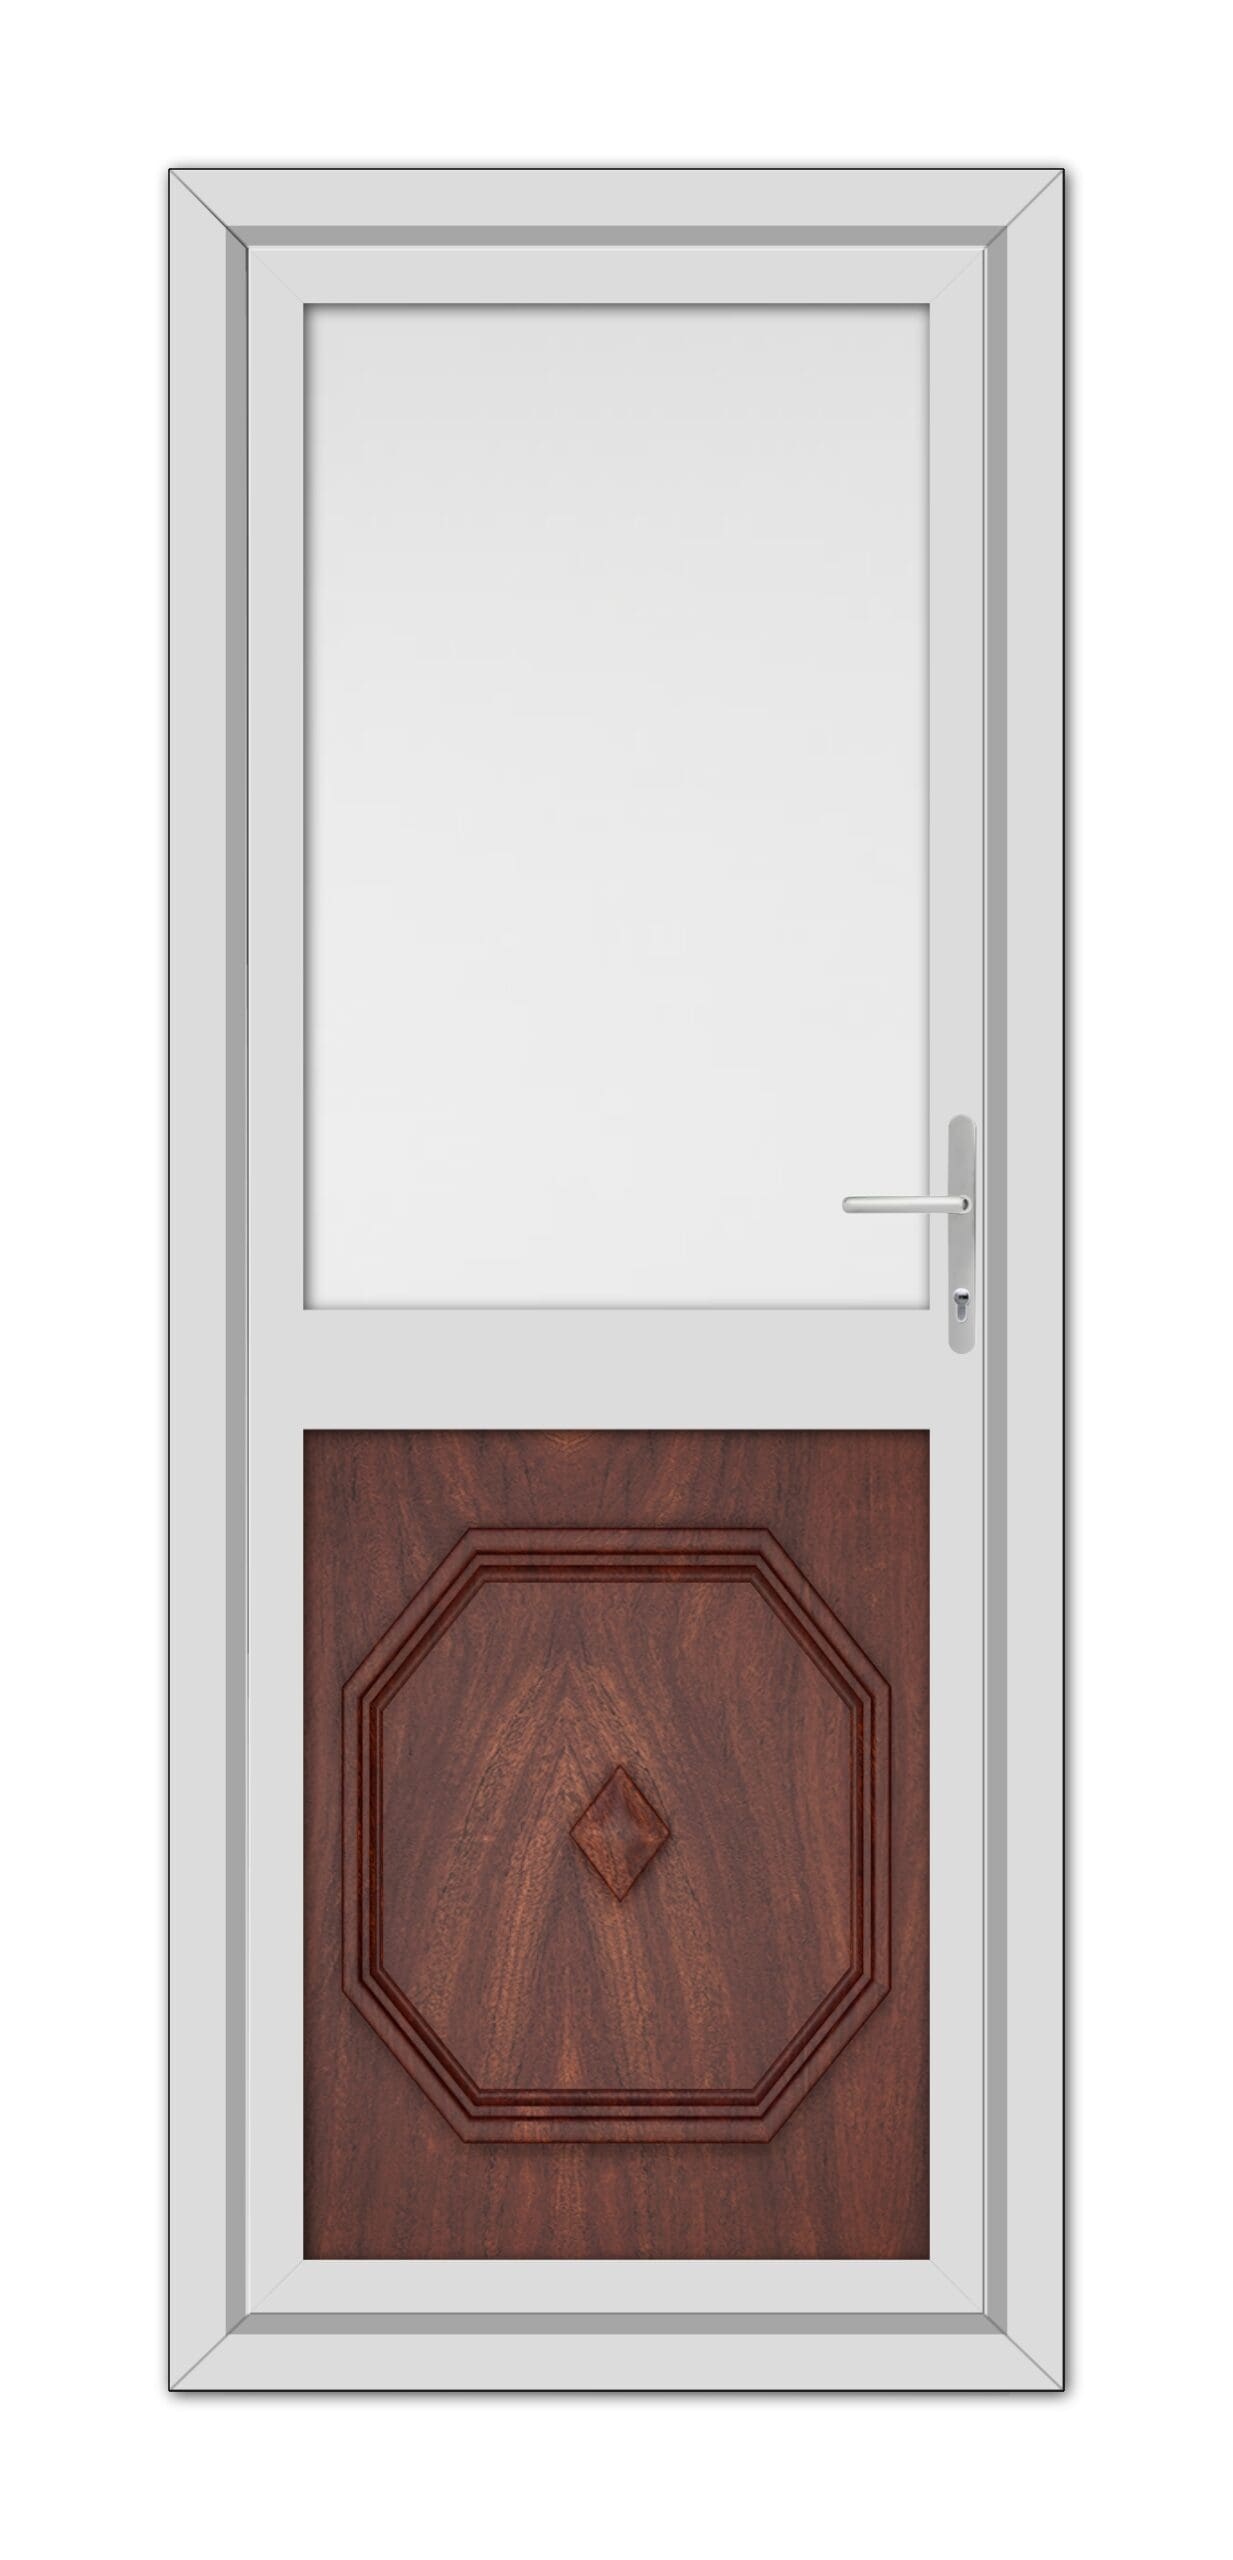 A modern Rosewood Westminster Half uPVC Back Door featuring a white frame, a wooden lower panel with a diamond design, a glass upper panel, and a metallic handle.